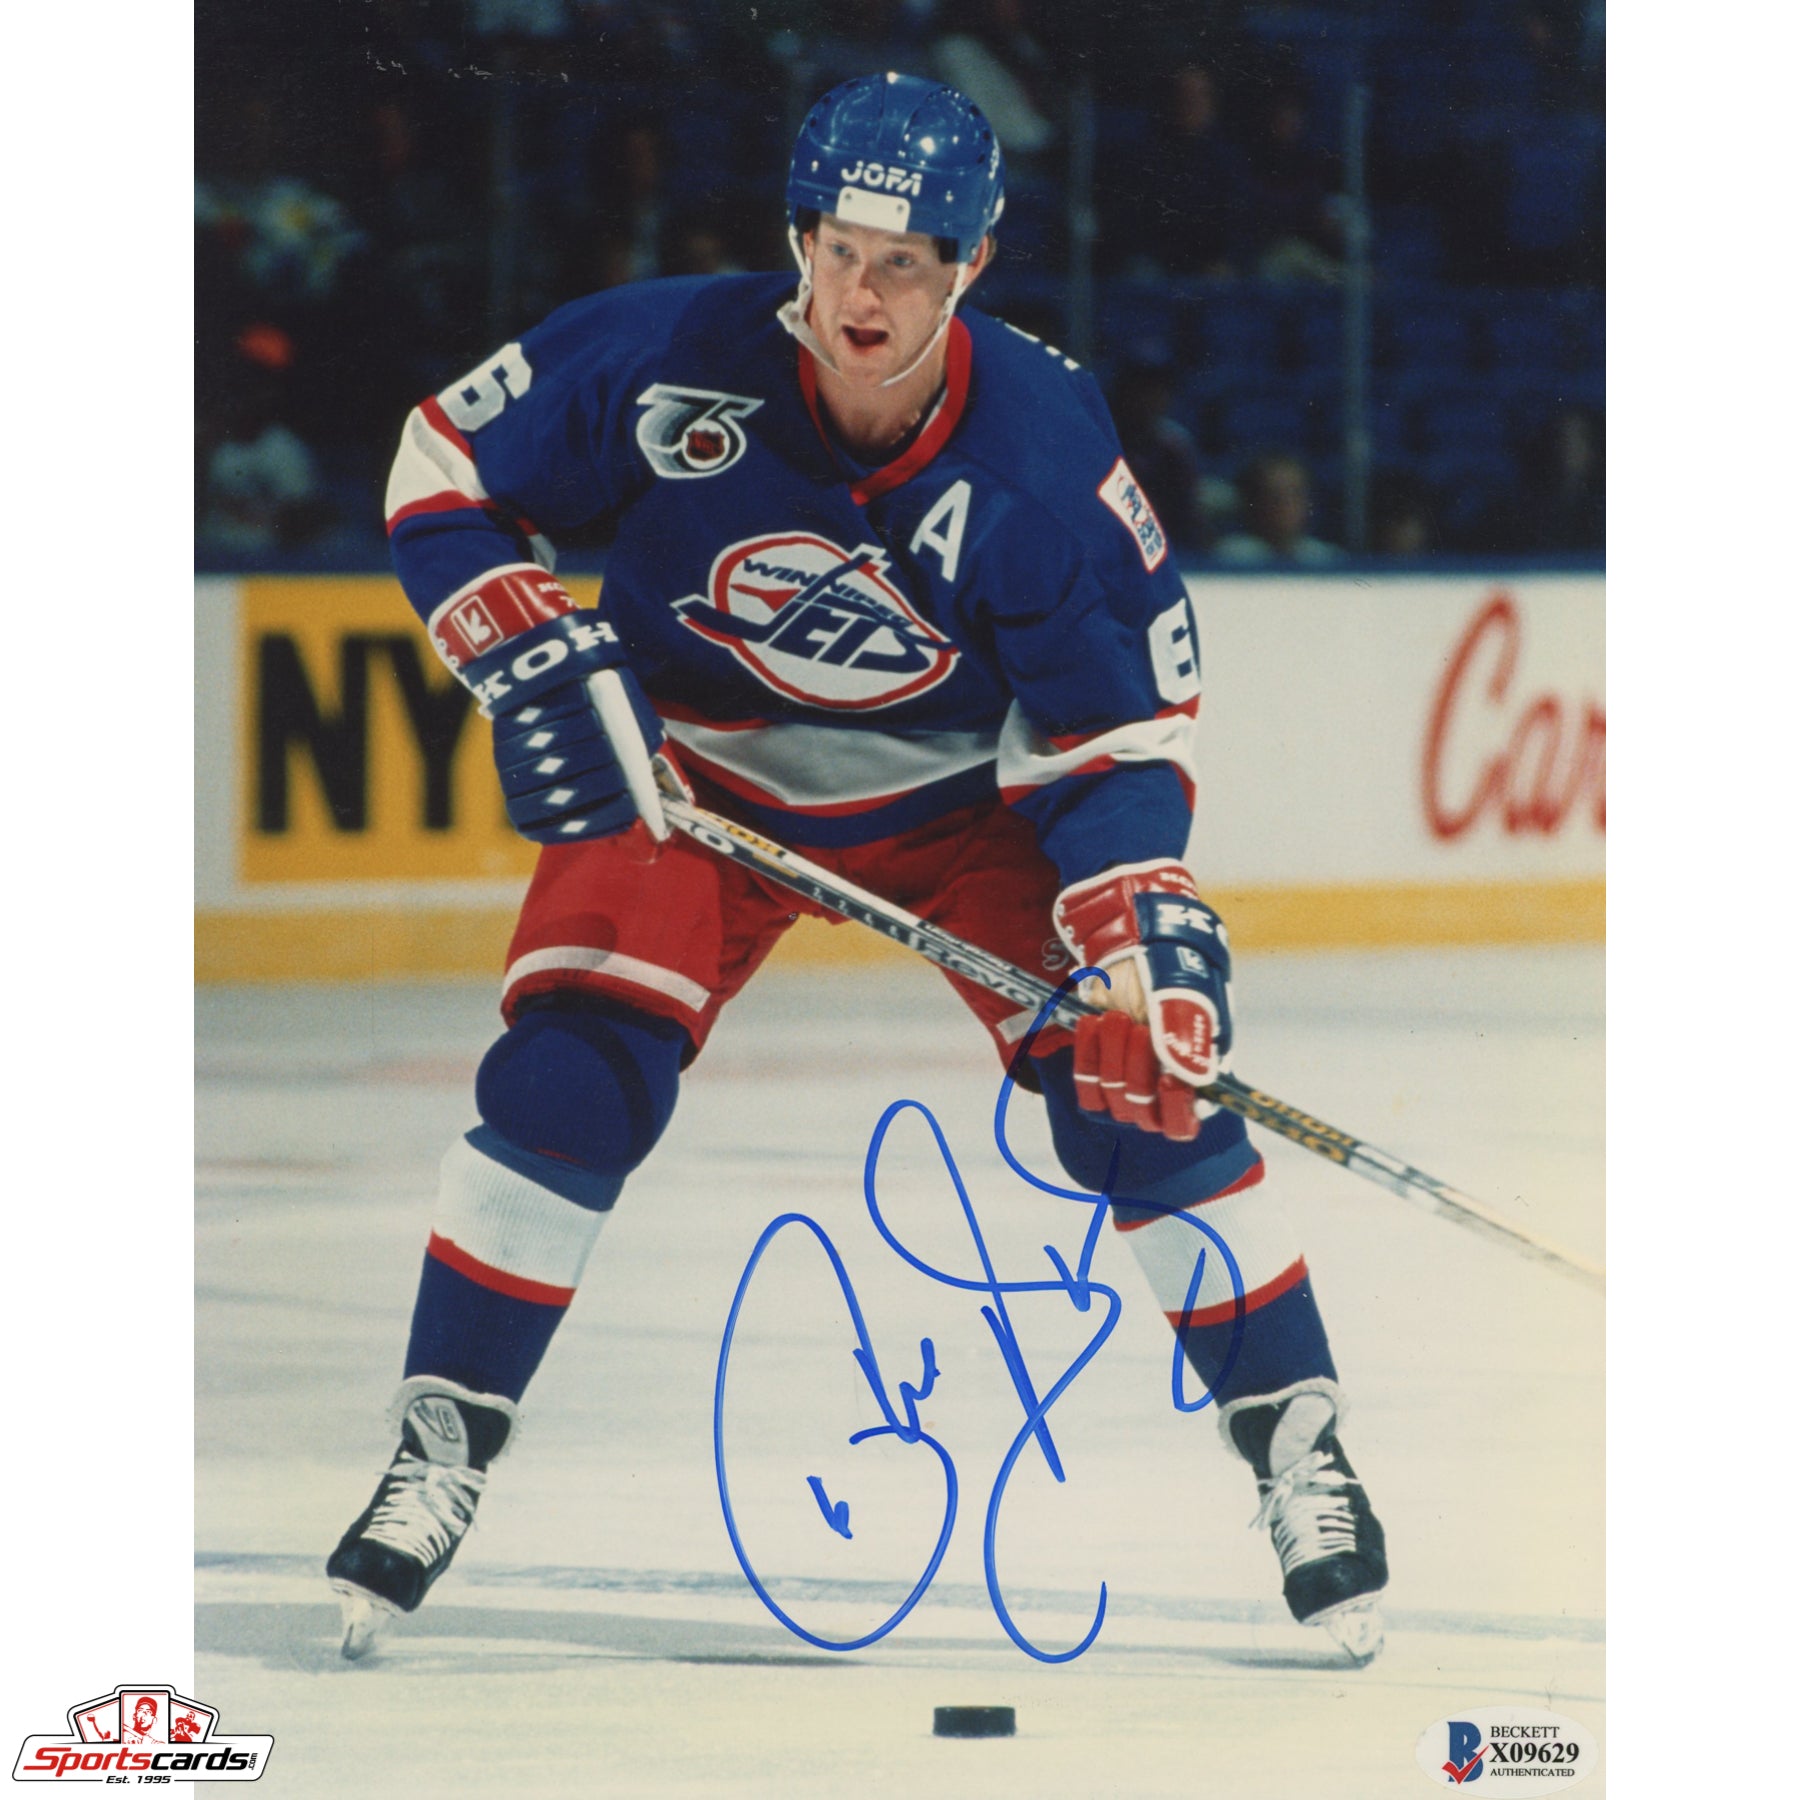 Phil Housley Signed Auto 8x10 Photo Beckett BAS Jets Flames